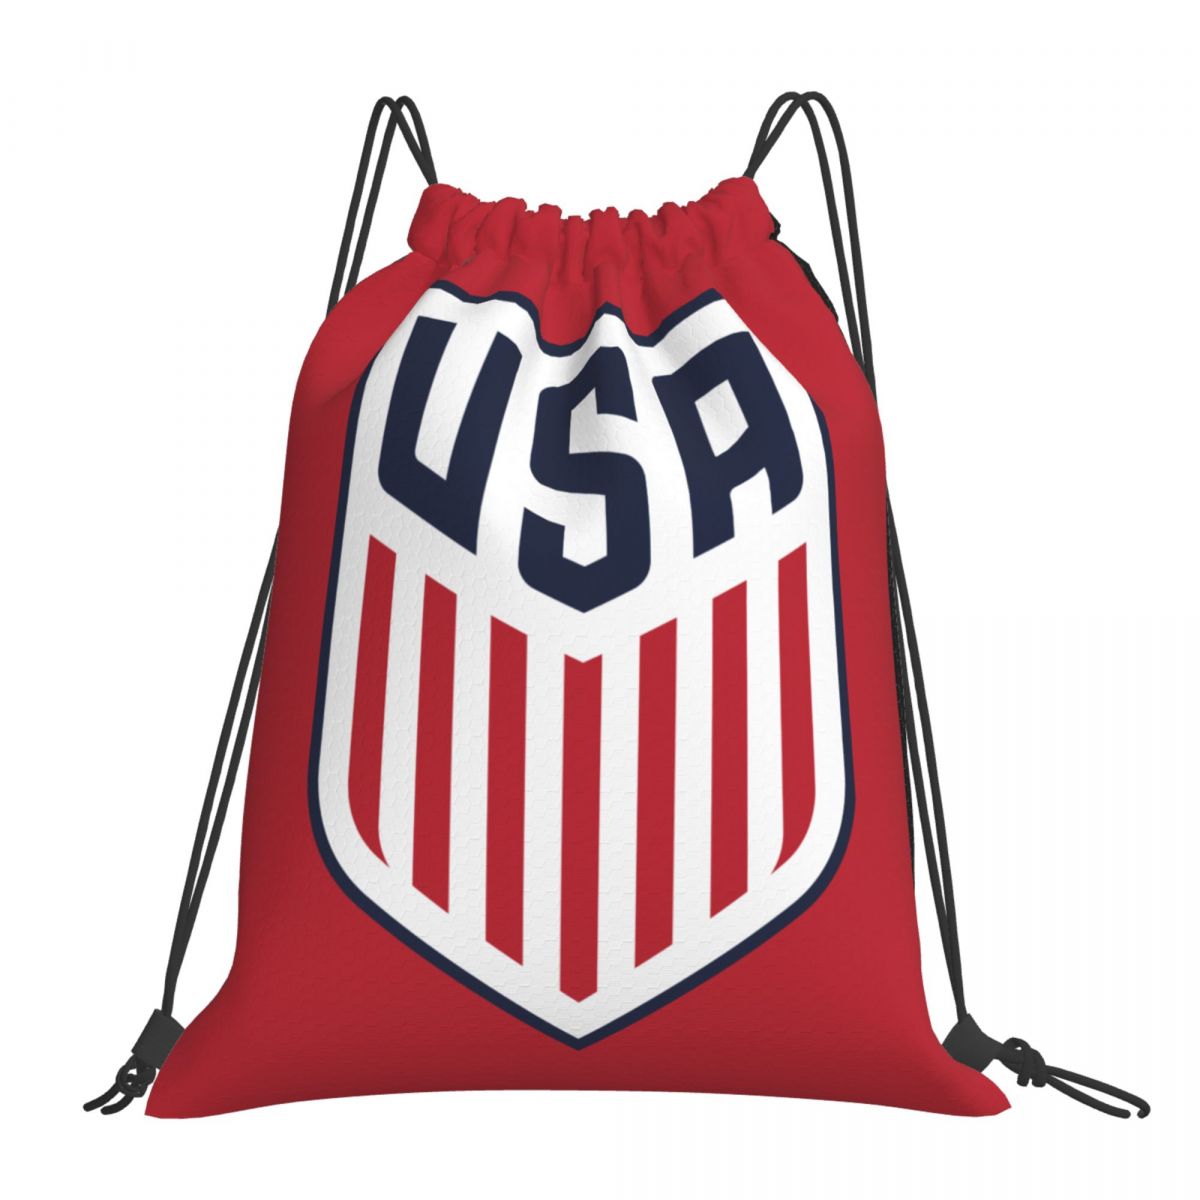 United States National Football Team Drawstring Bags for School Gym